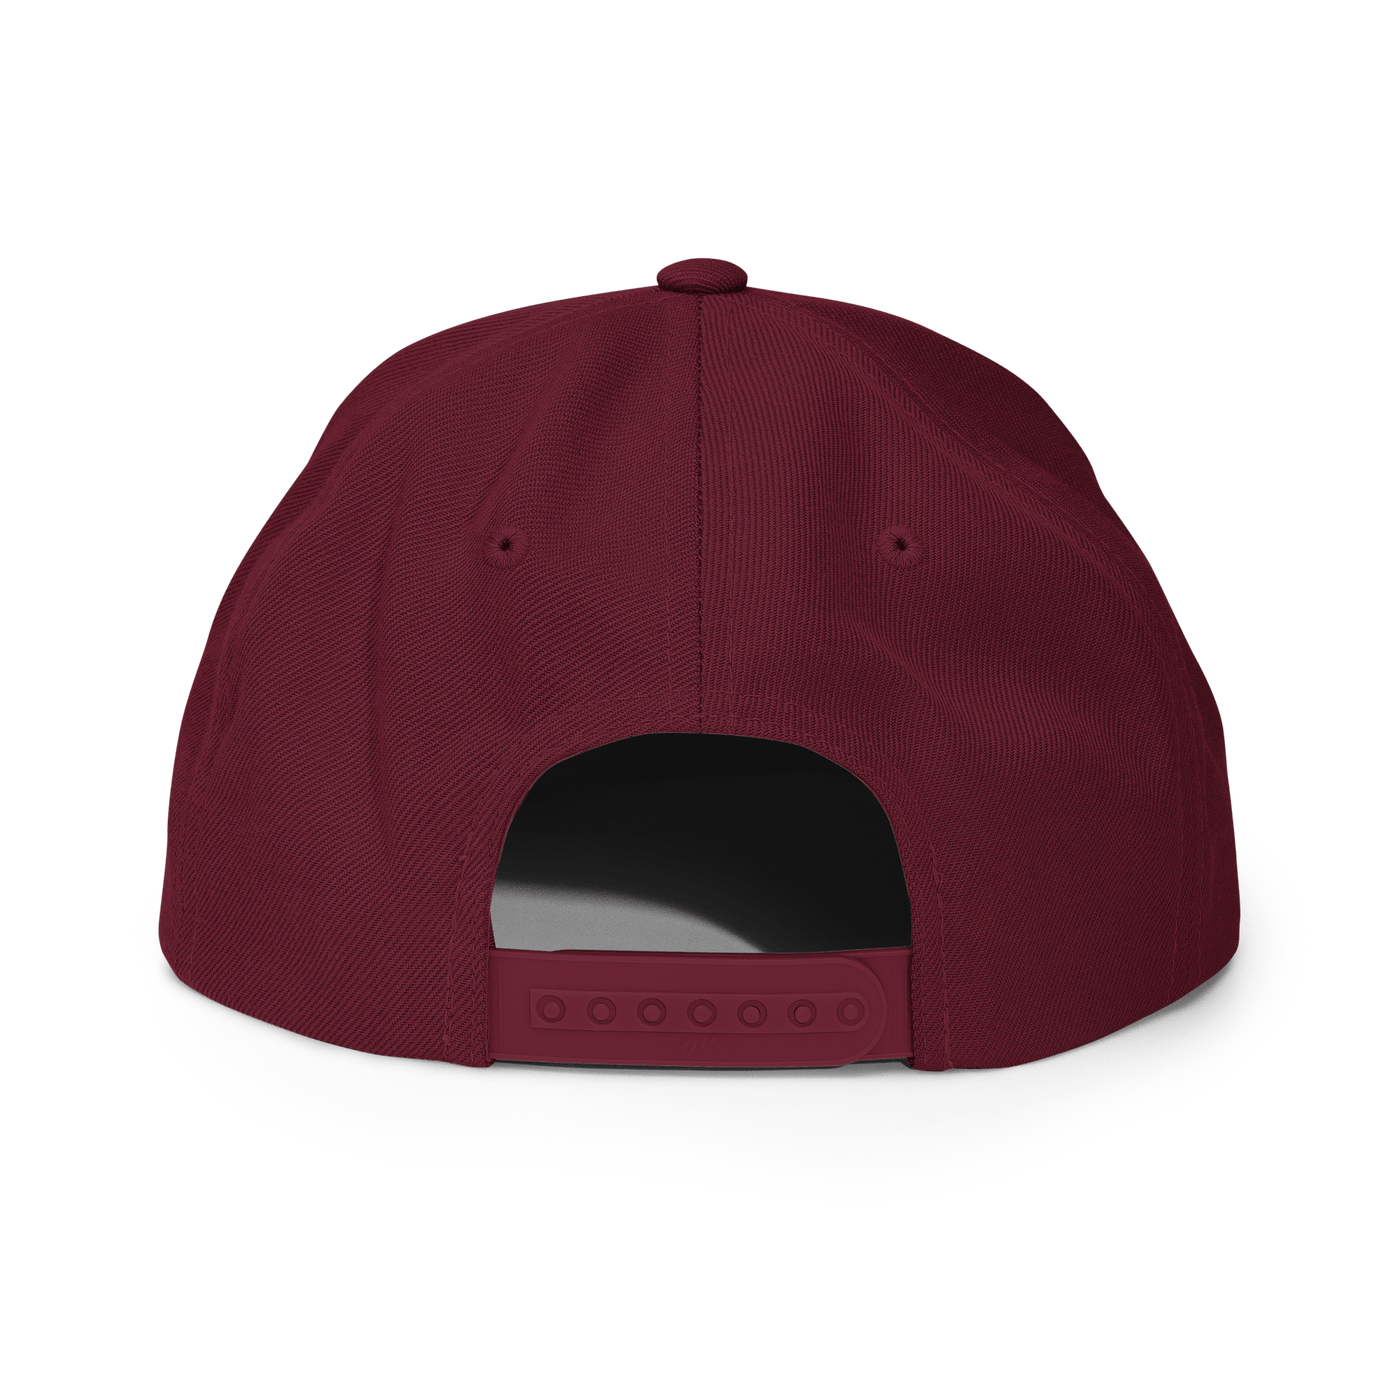 Astronaut Snapback Hat - Maroon - - Just Another Cap Store